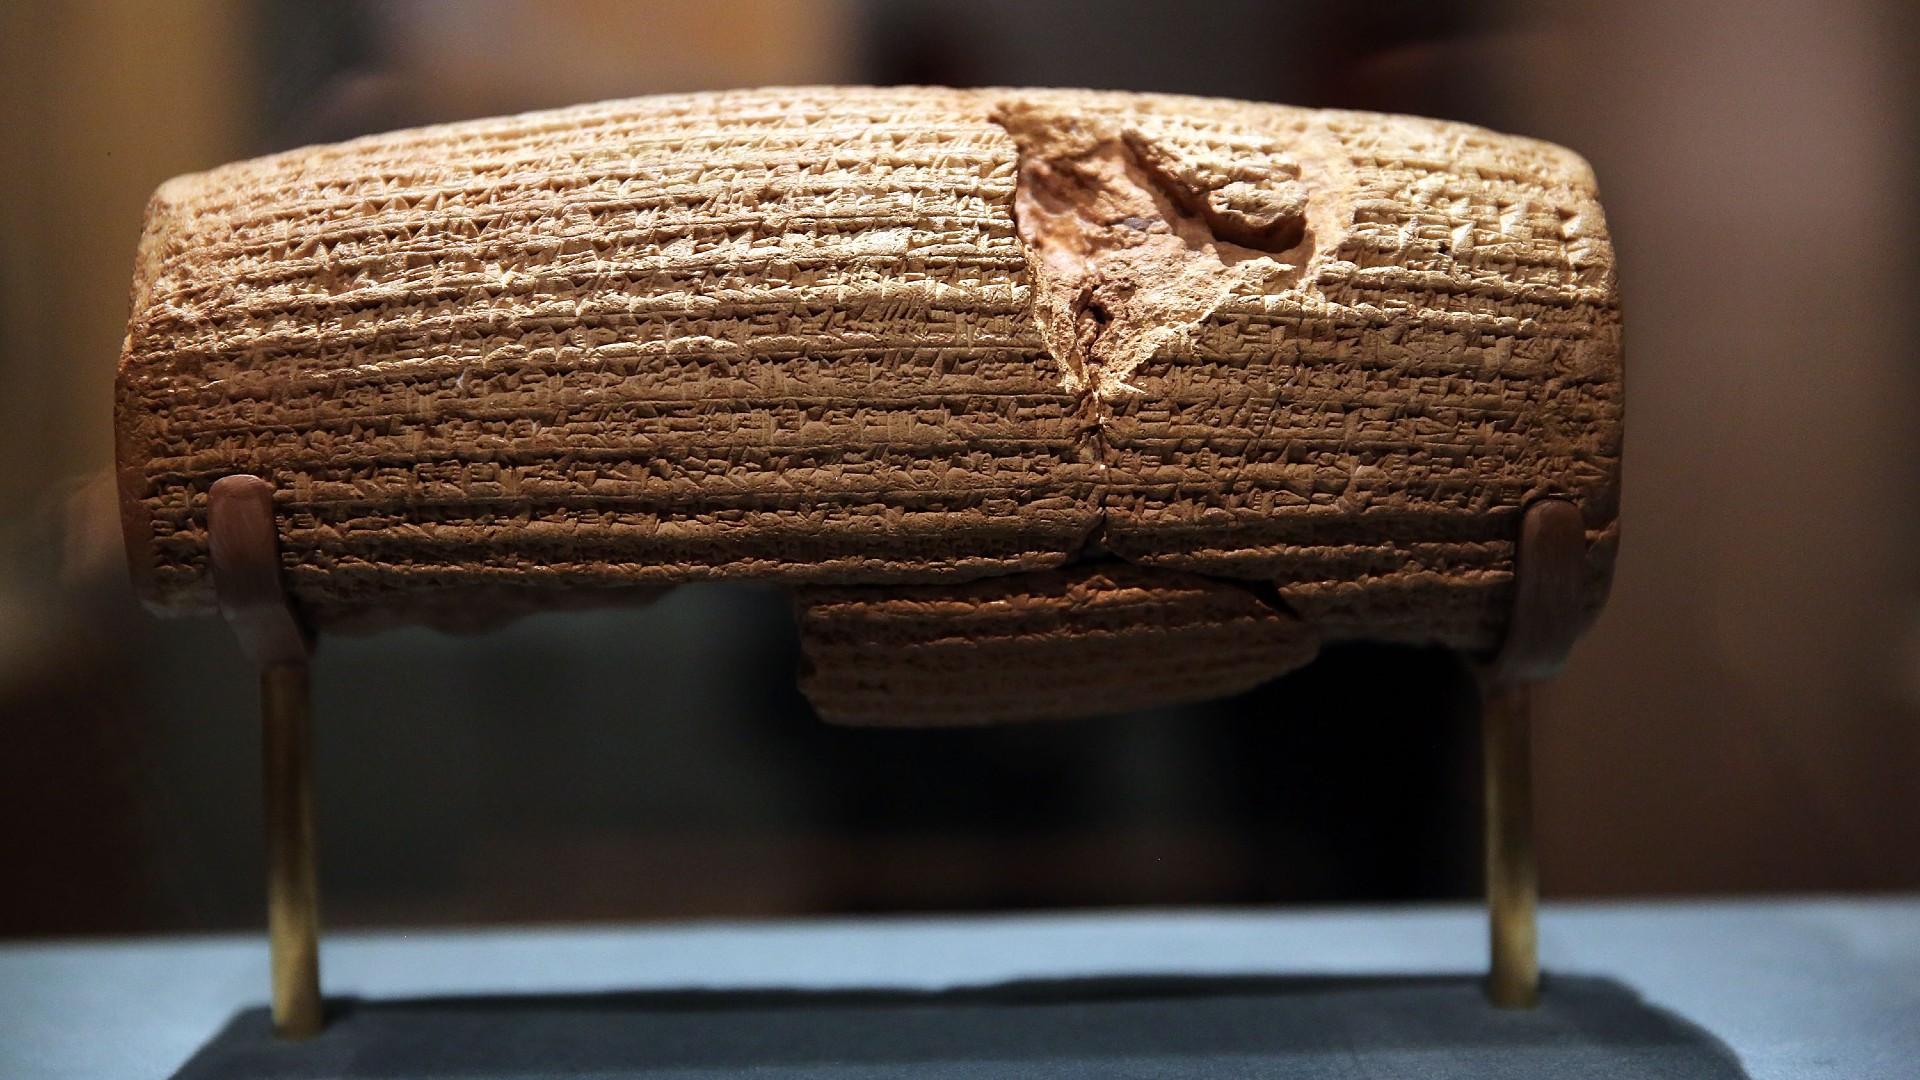 The Cyrus Cylinder, held in the British Museum, made by the Persian ruler Cyrus, who conquered Babylon in 539 B.C.